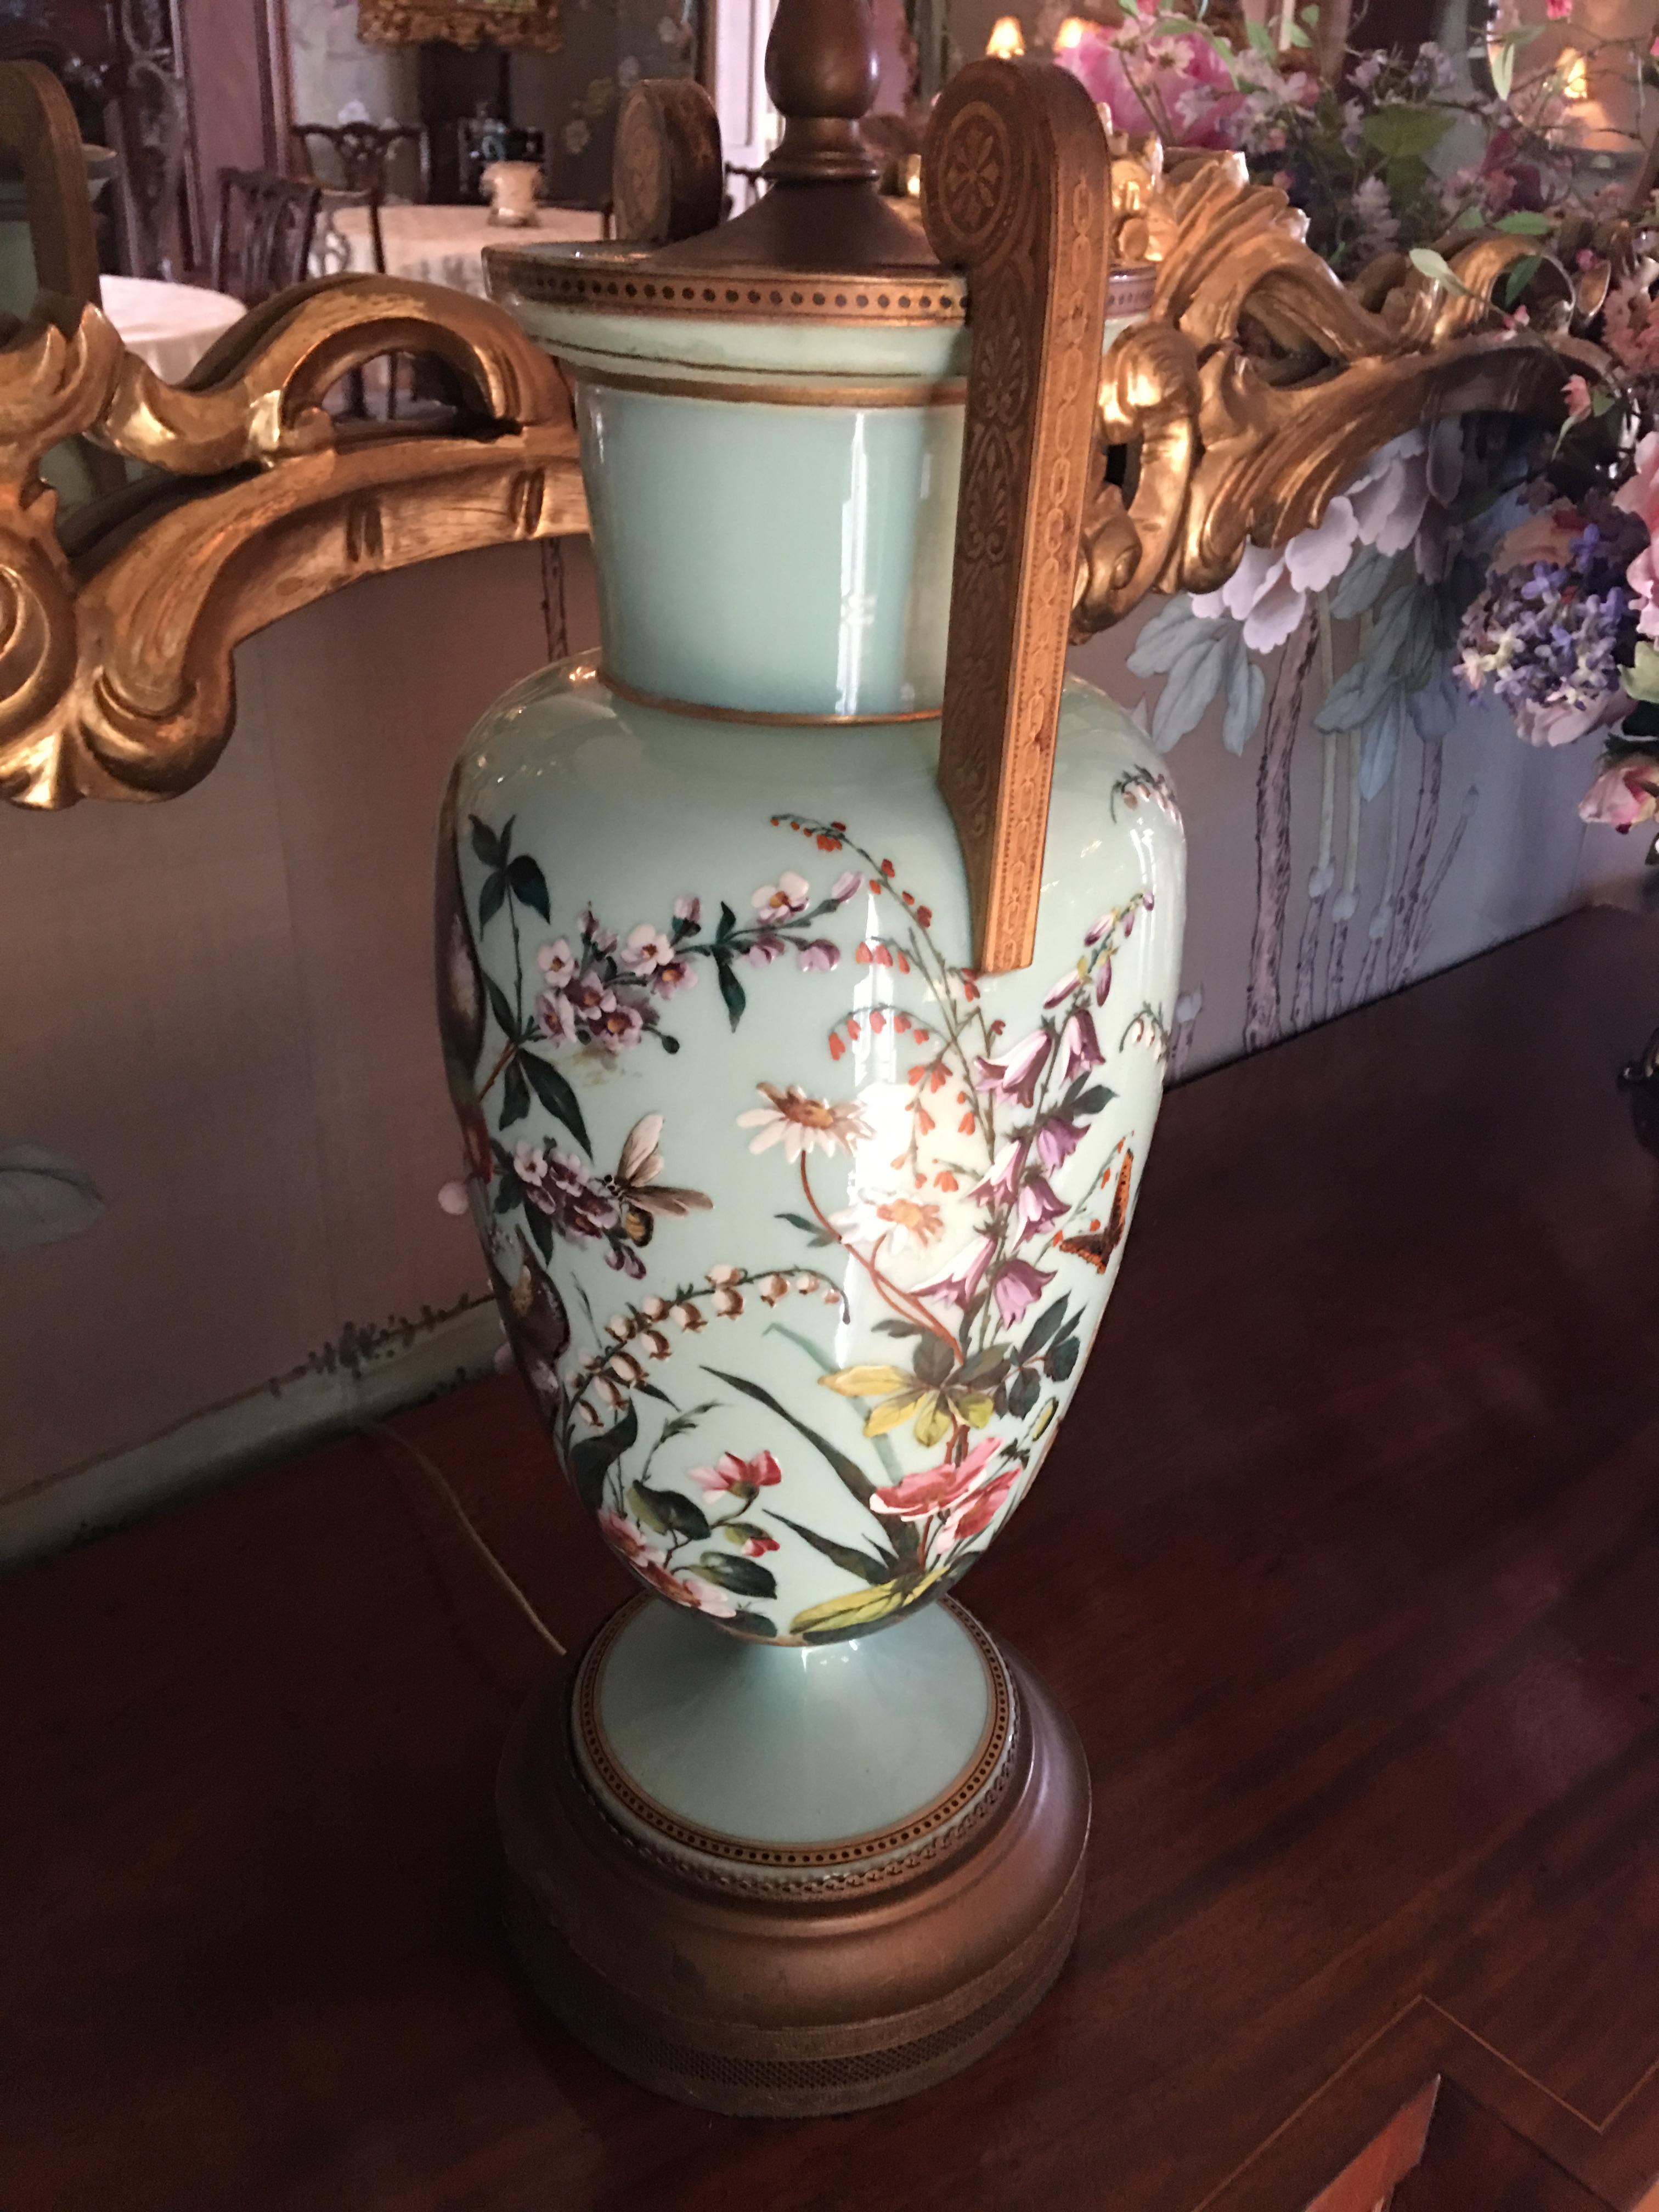 Pair of Porcelain Lamps in an Aqua Color and Floral Decorations, 20th Century 2